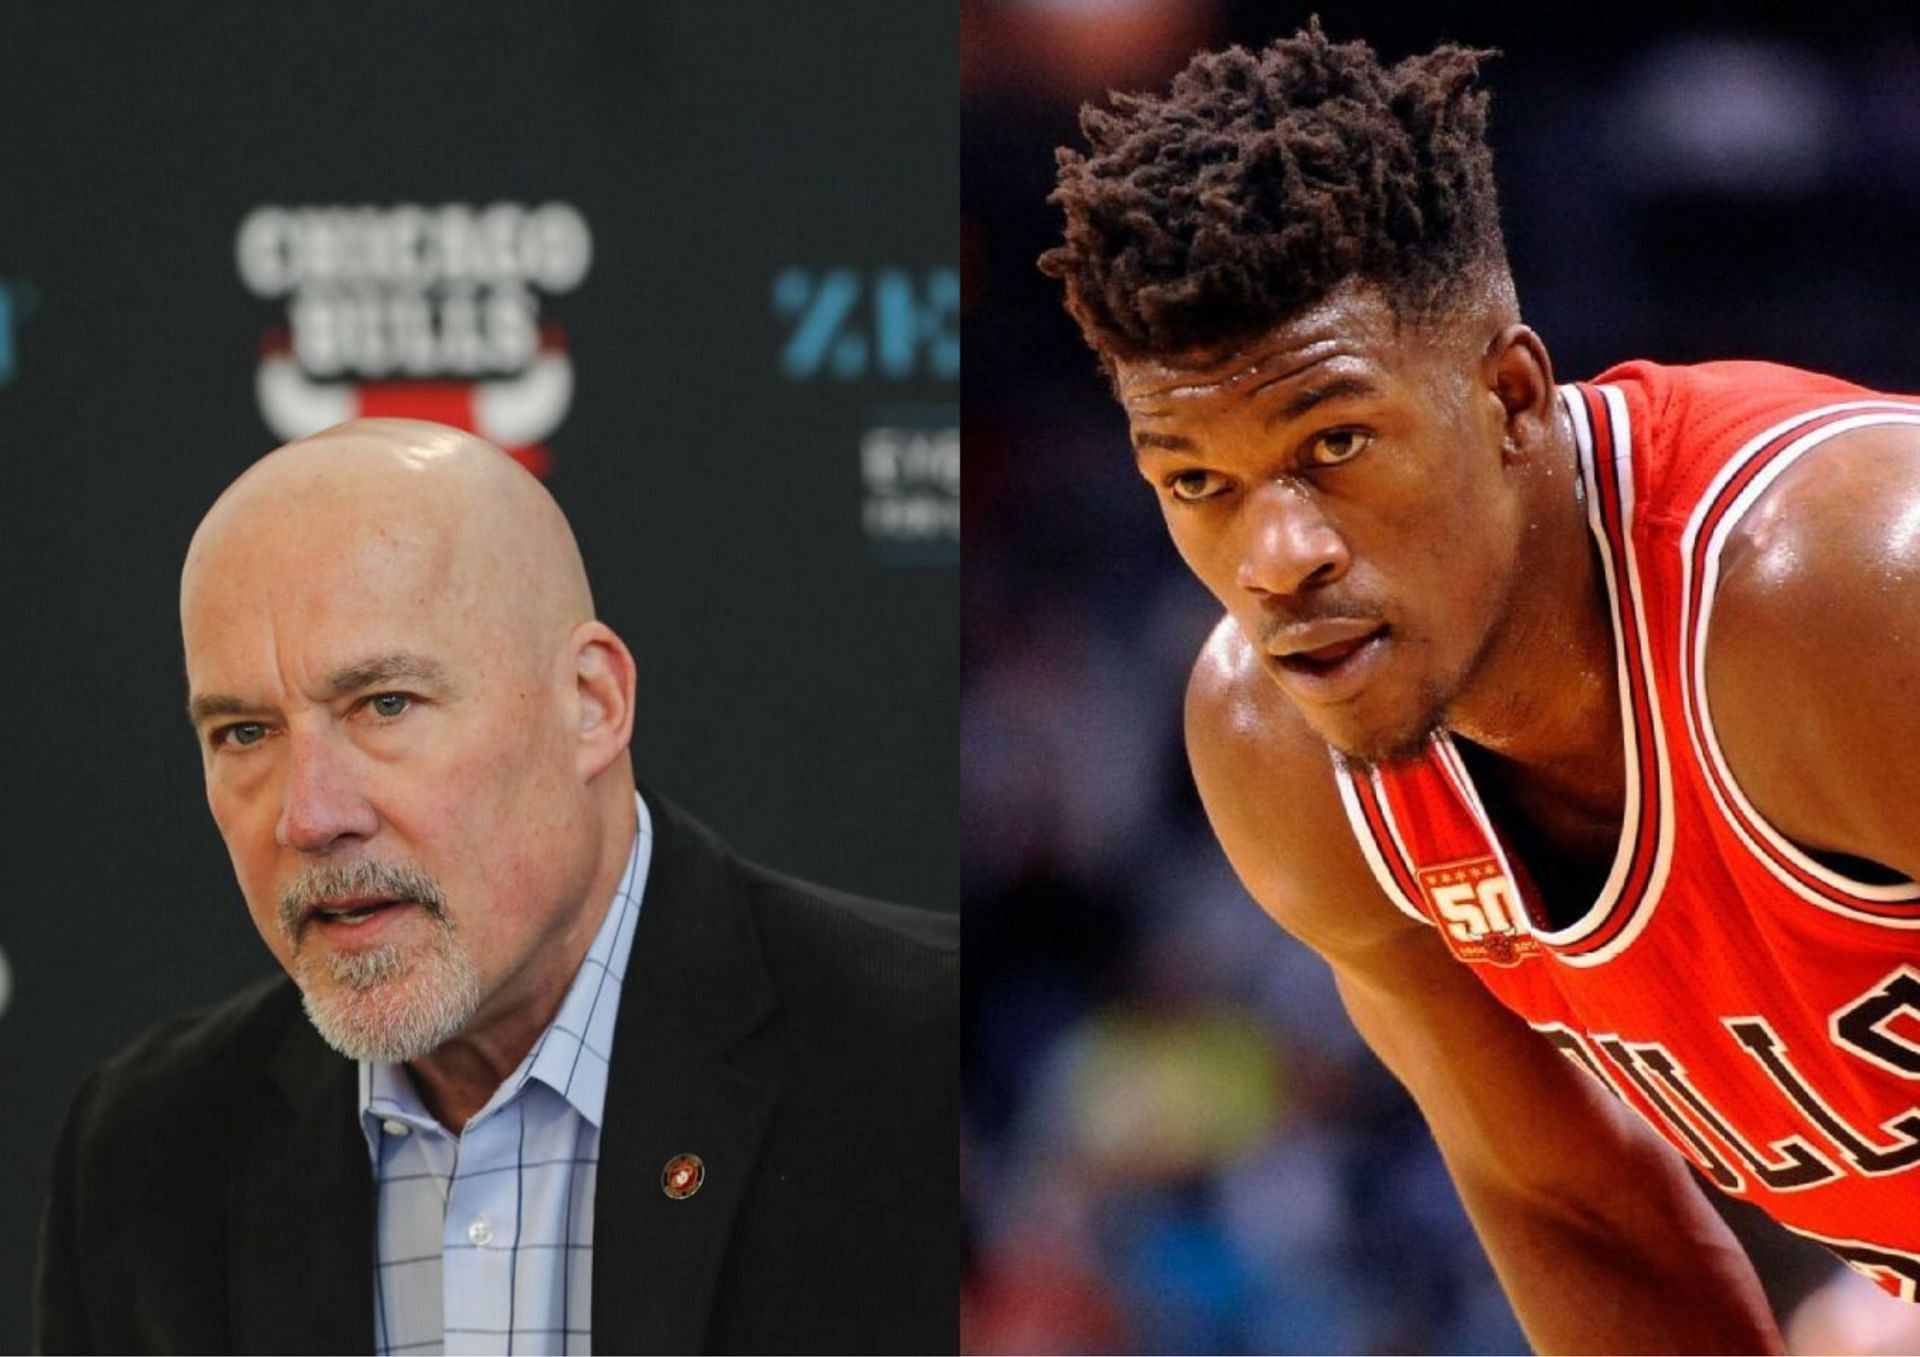 The Chicago Bulls traded Jimmy Butler to the Minnesota Timberwolves in 2017 for Zach LaVine, Kris Dunn and the No. 7 pick of the draft.